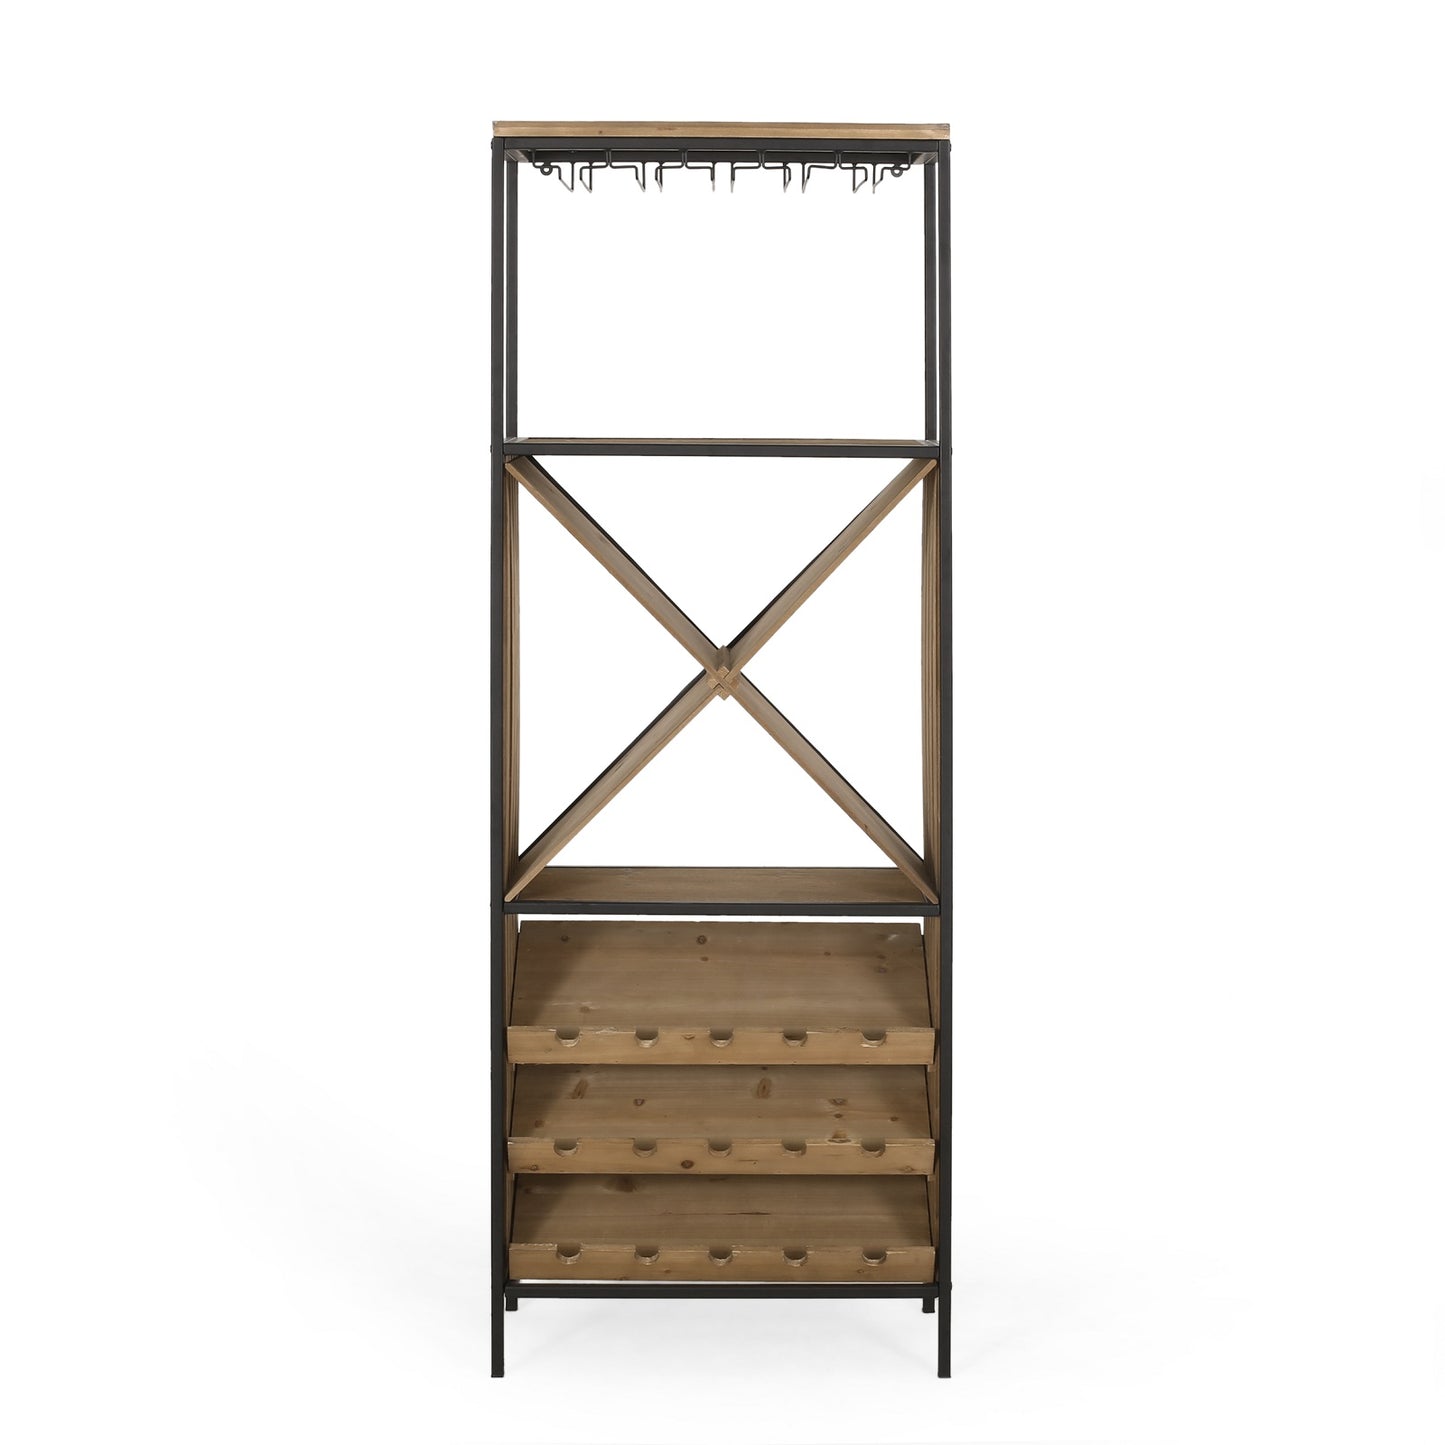 Algherohein Wine Rack with 3-Tiers Wine Storage Shelves and Glass Holders,Wine Bar Cabinet